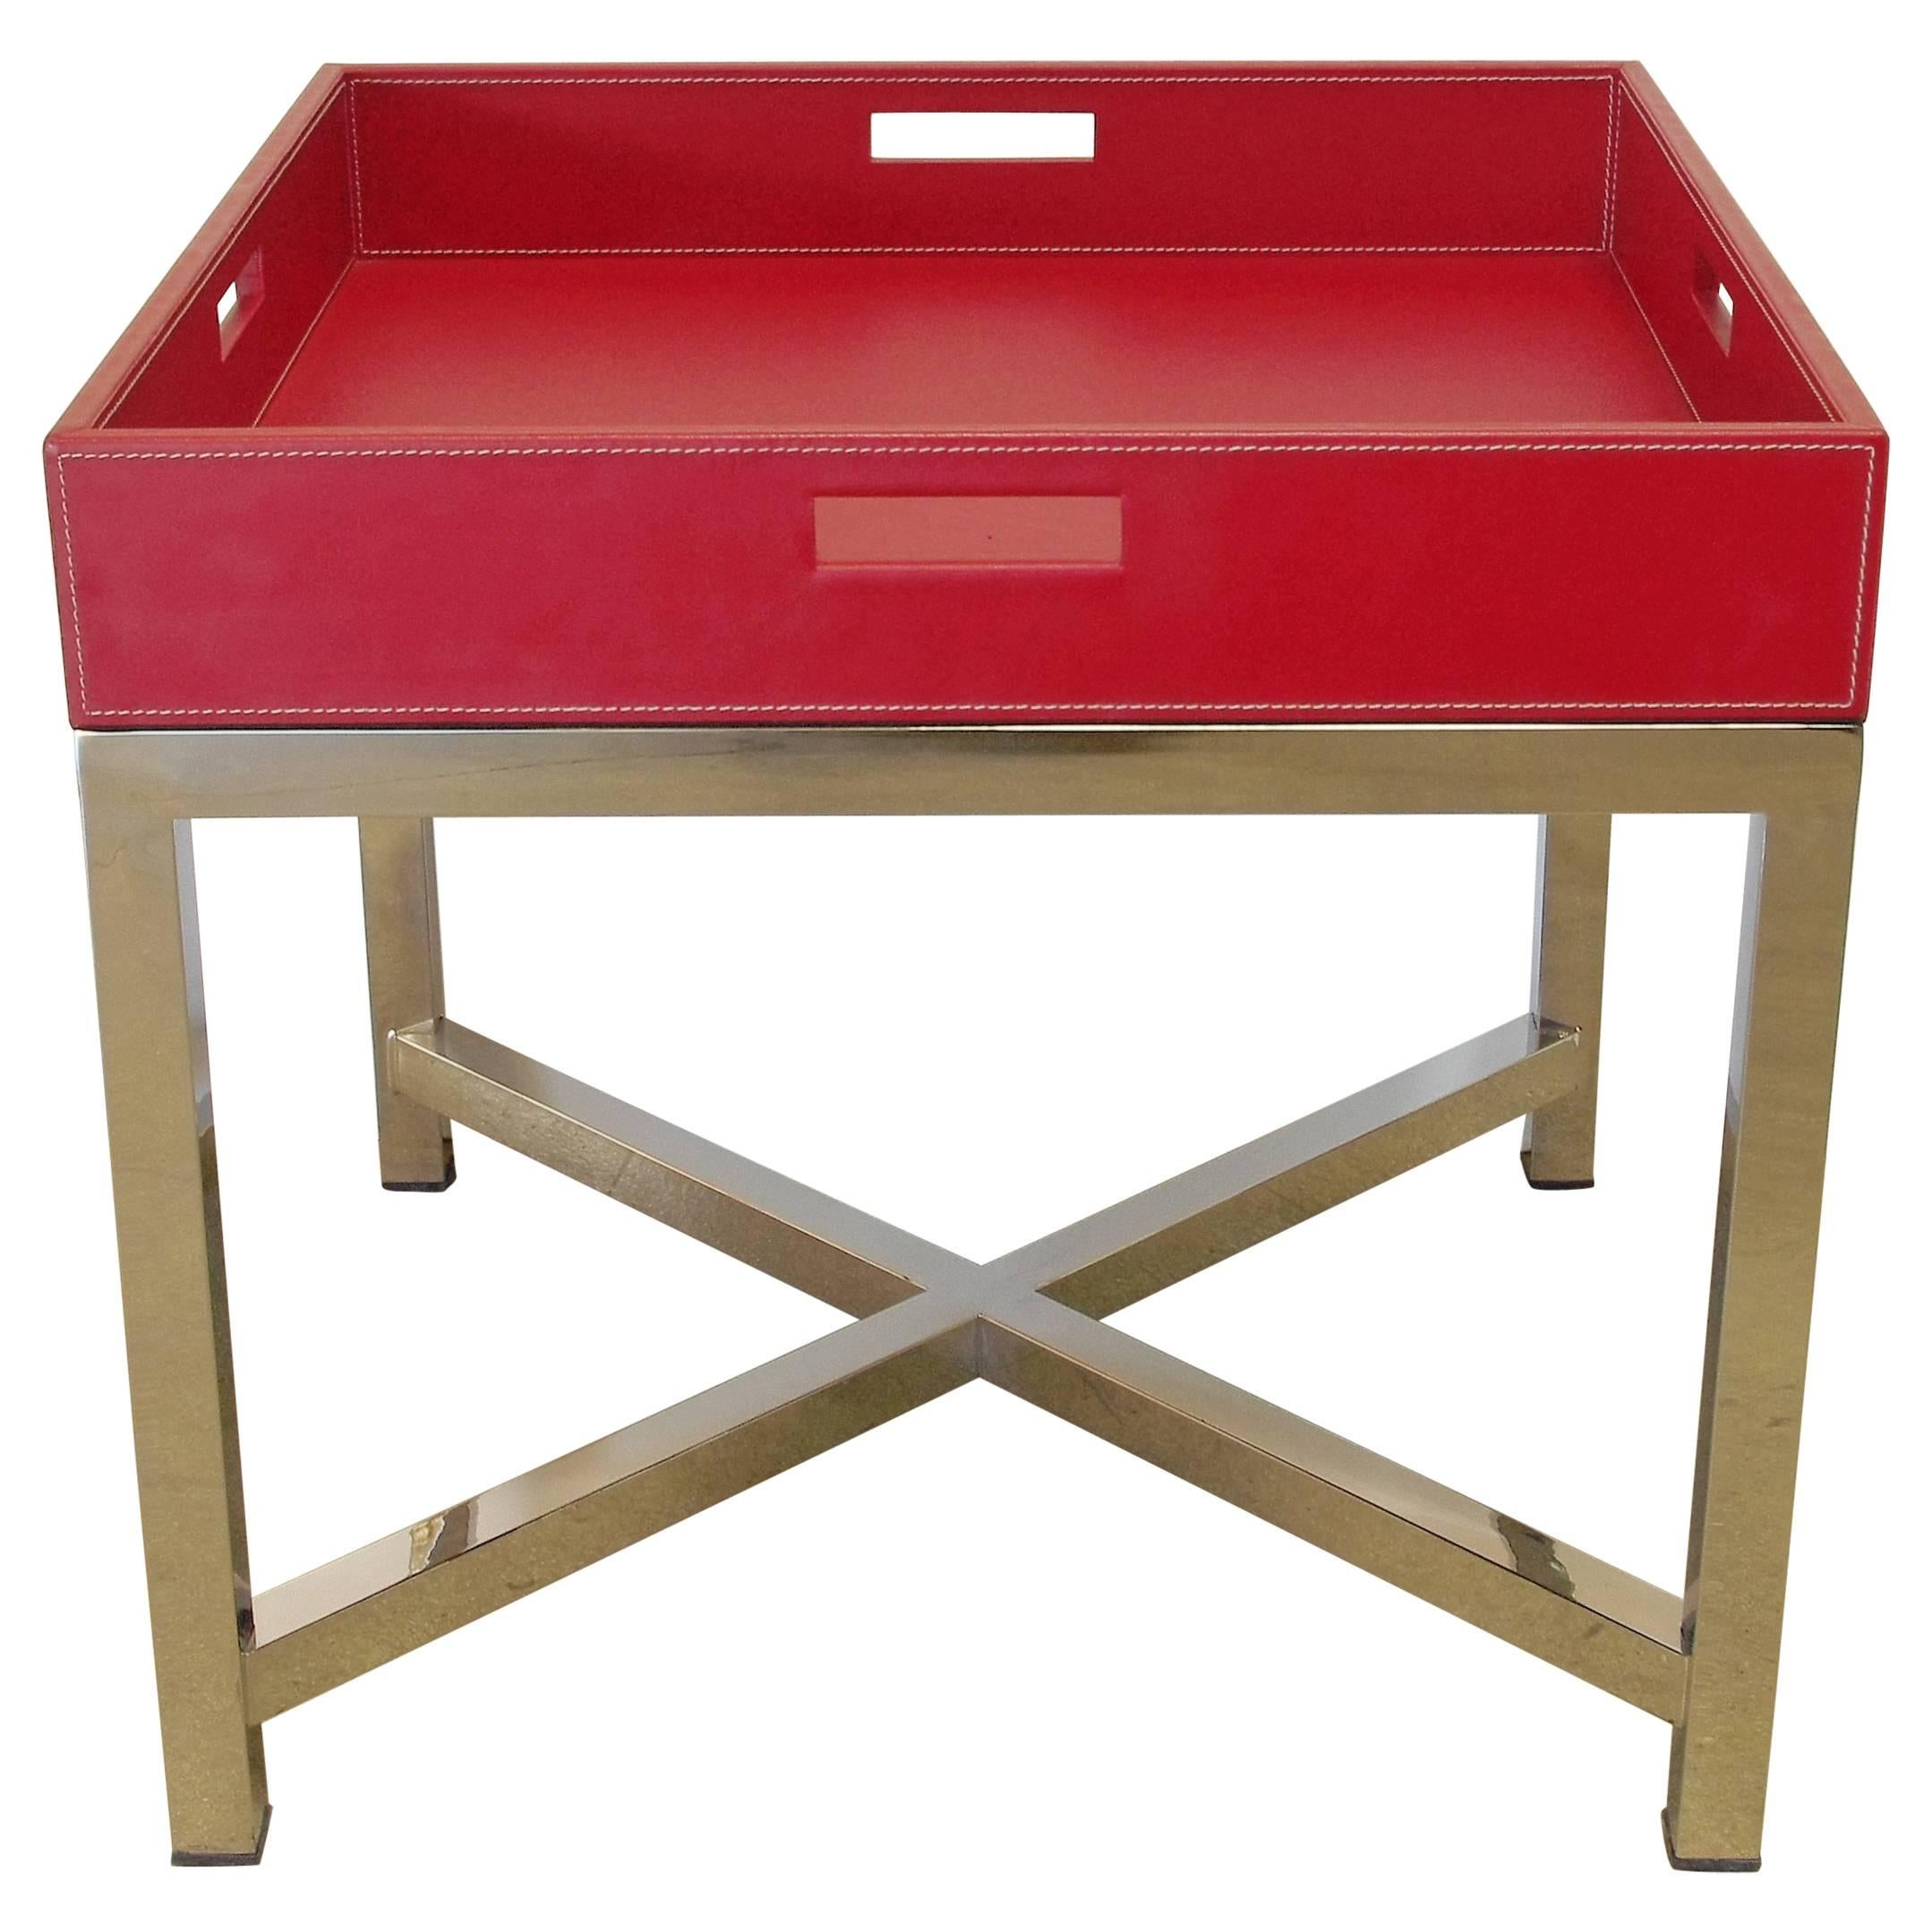 Red Leather and Stainless Steel Tray Table by Fabio Ltd FINAL CLEARANCE SALE